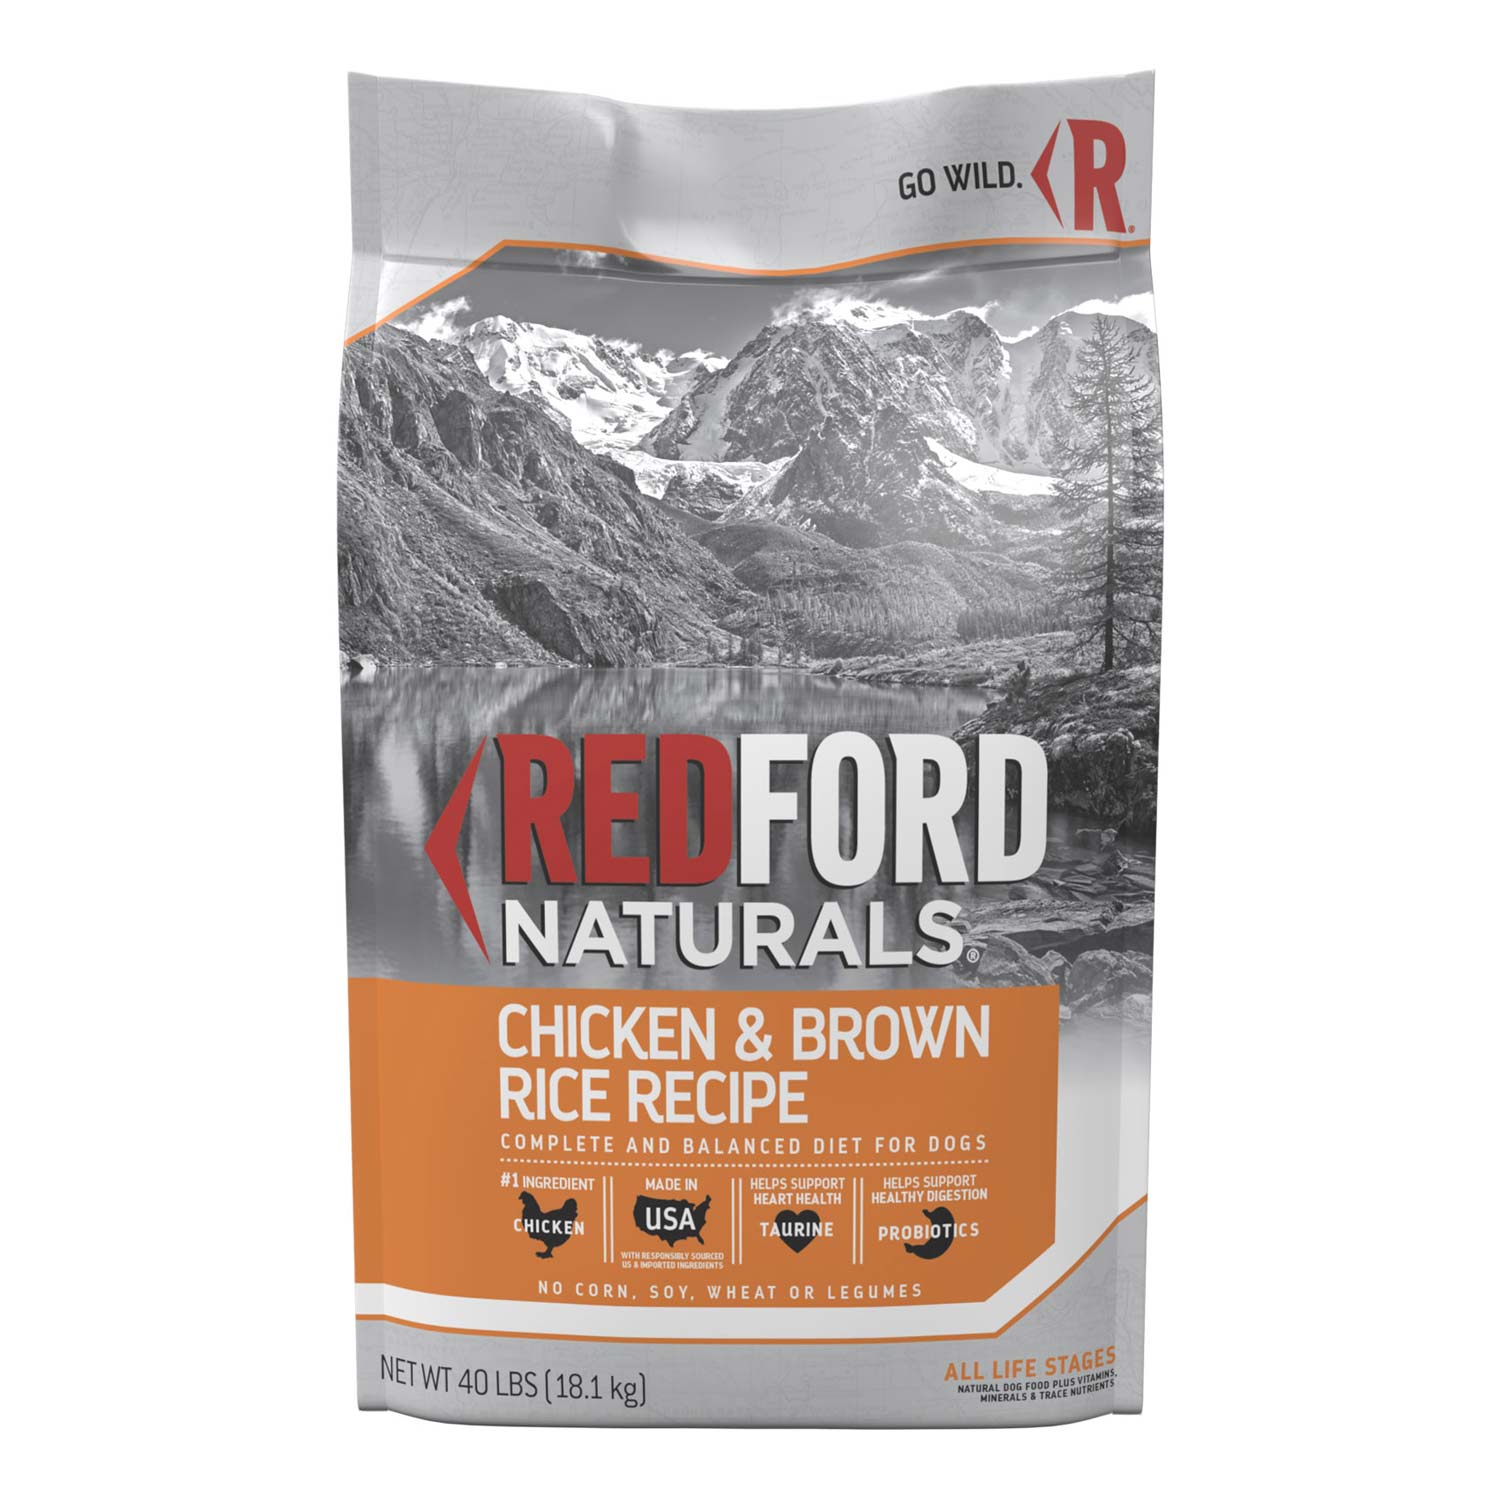 Redford Naturals Chicken & Brown Rice Recipe Adult Dry Dog Food, 40 Pounds